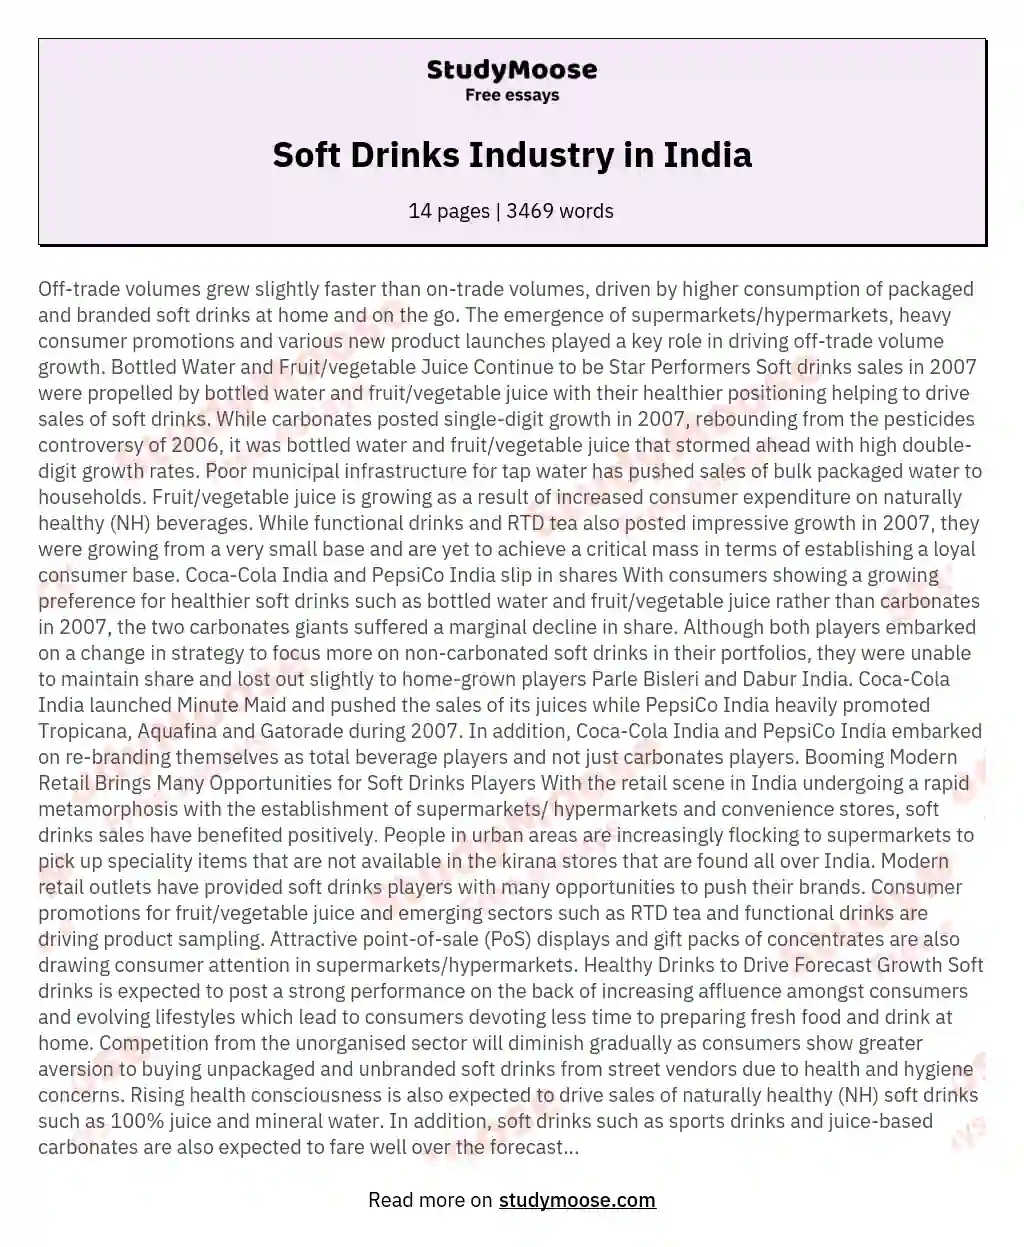 Soft Drinks Industry in India essay